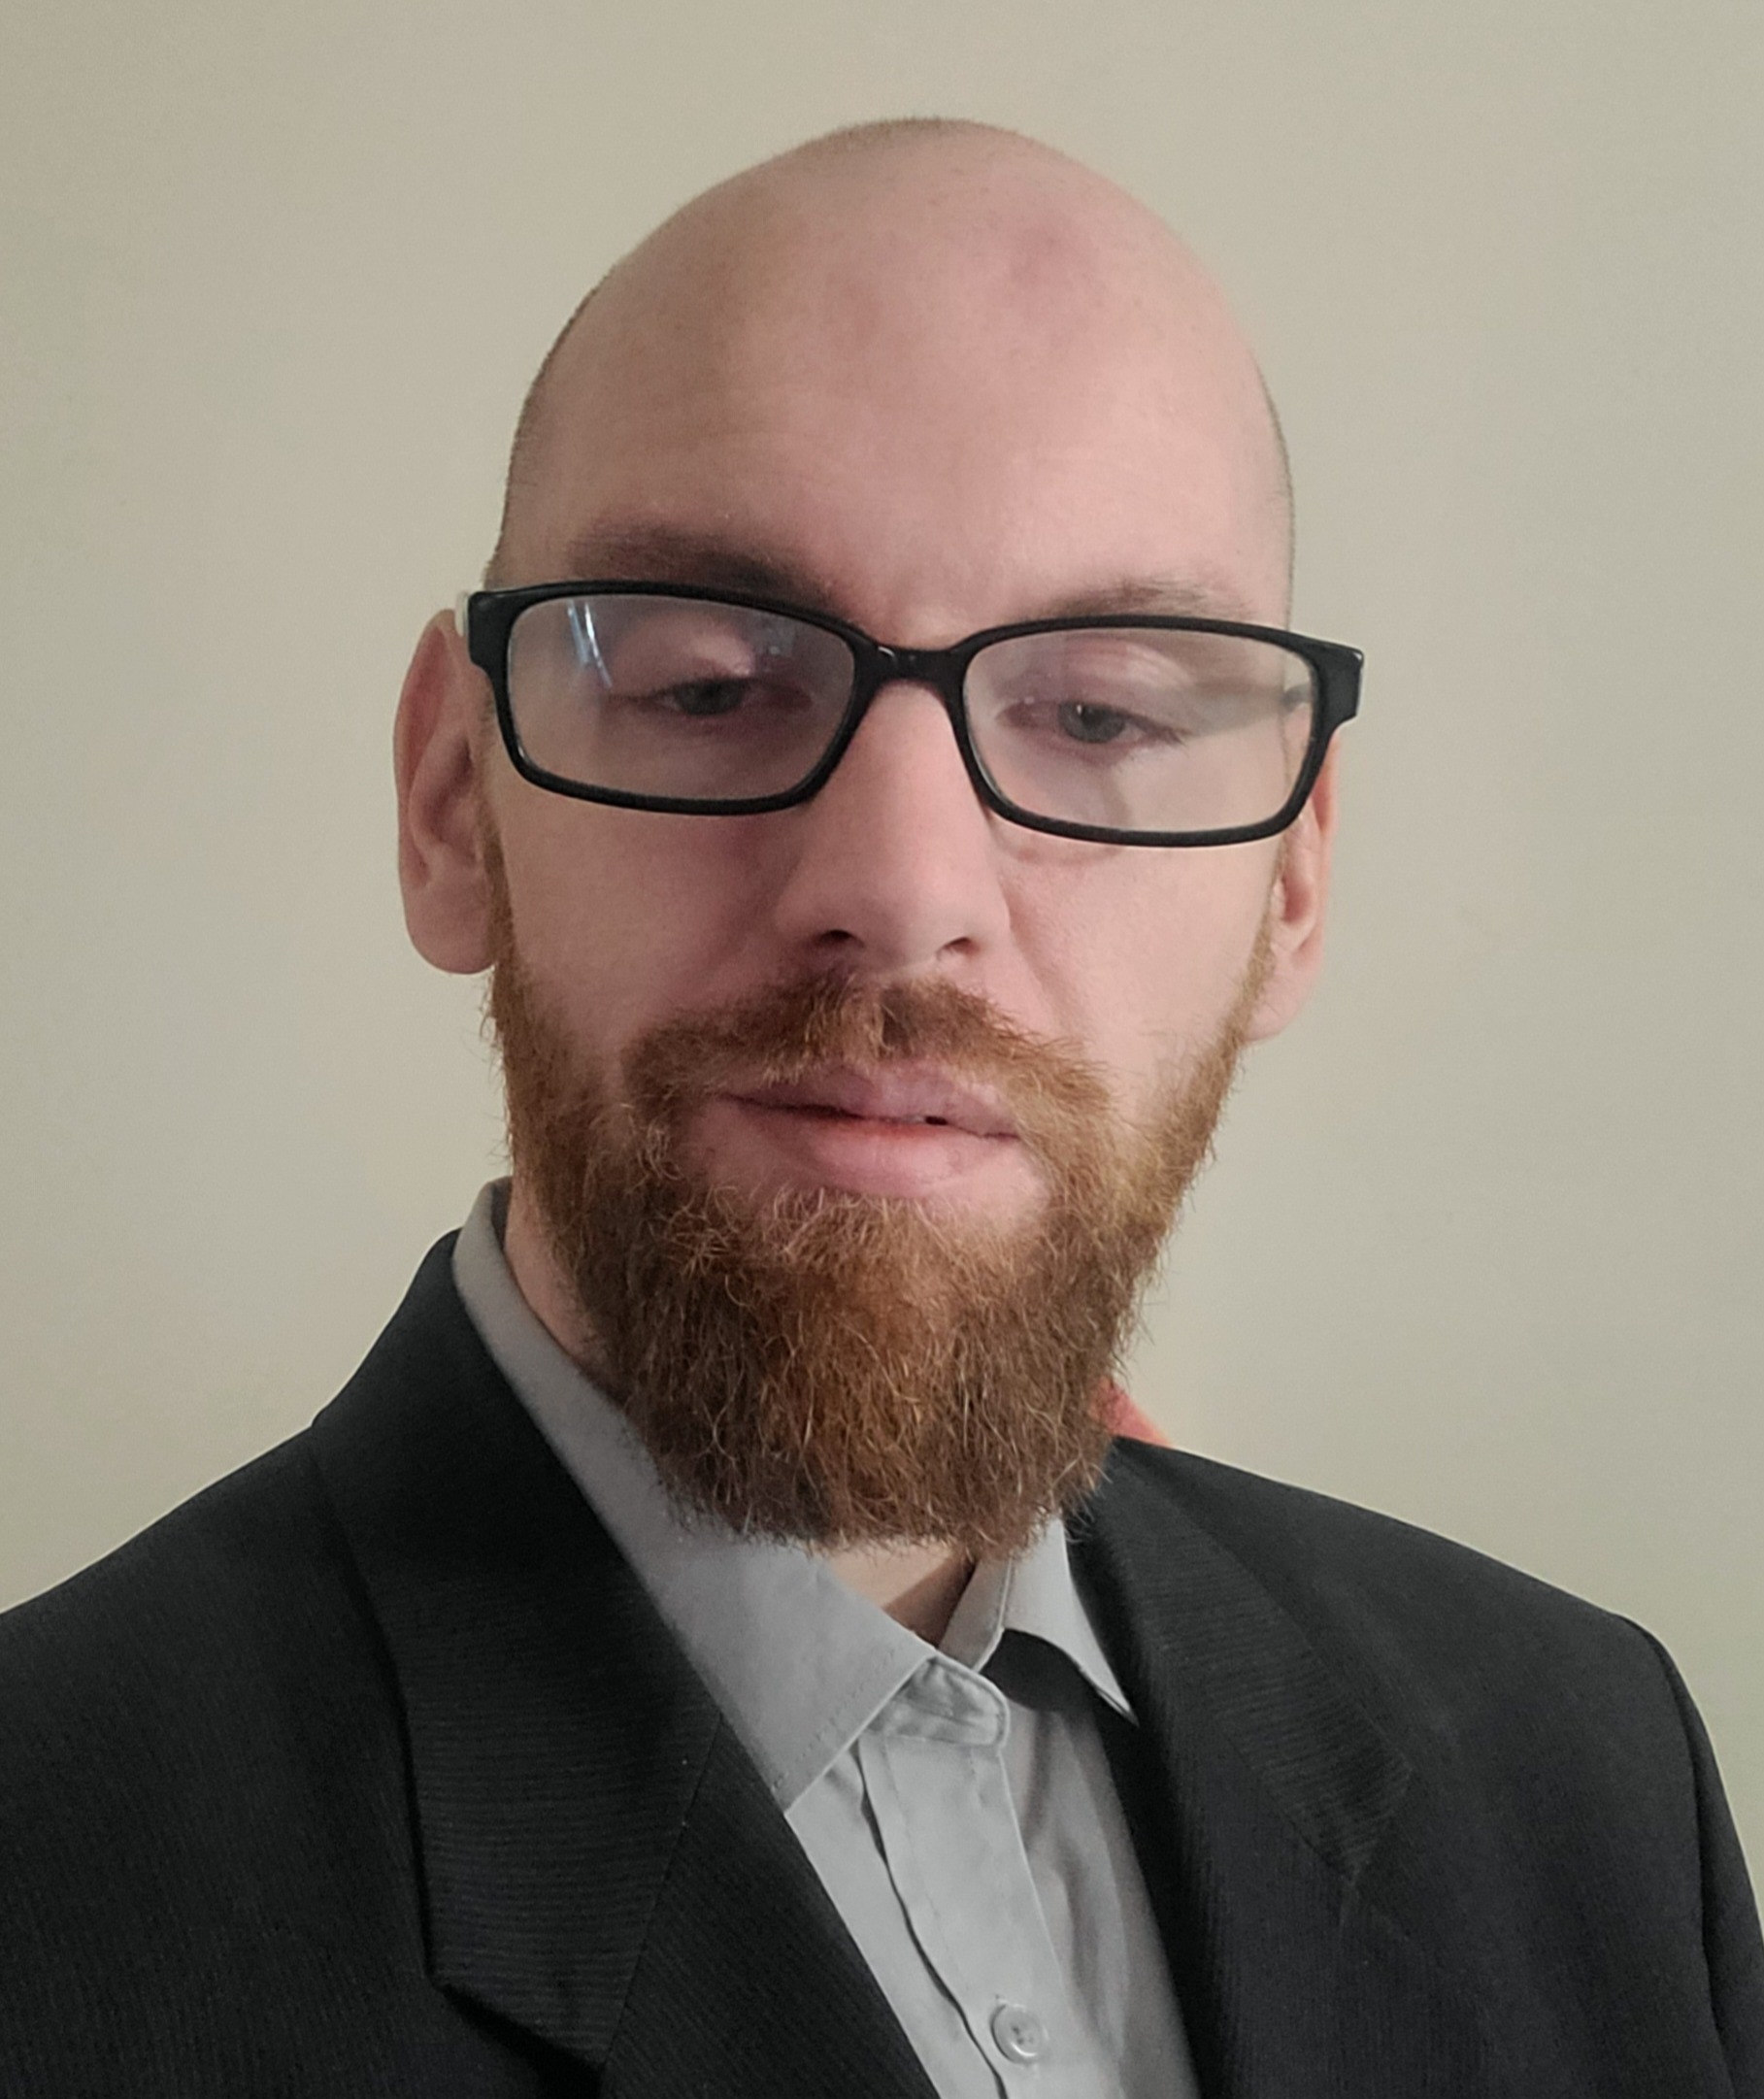 Dave Miller, bald, black thick-rimmed glasses with beard. Wearing suit jacked and blue-grey shirt